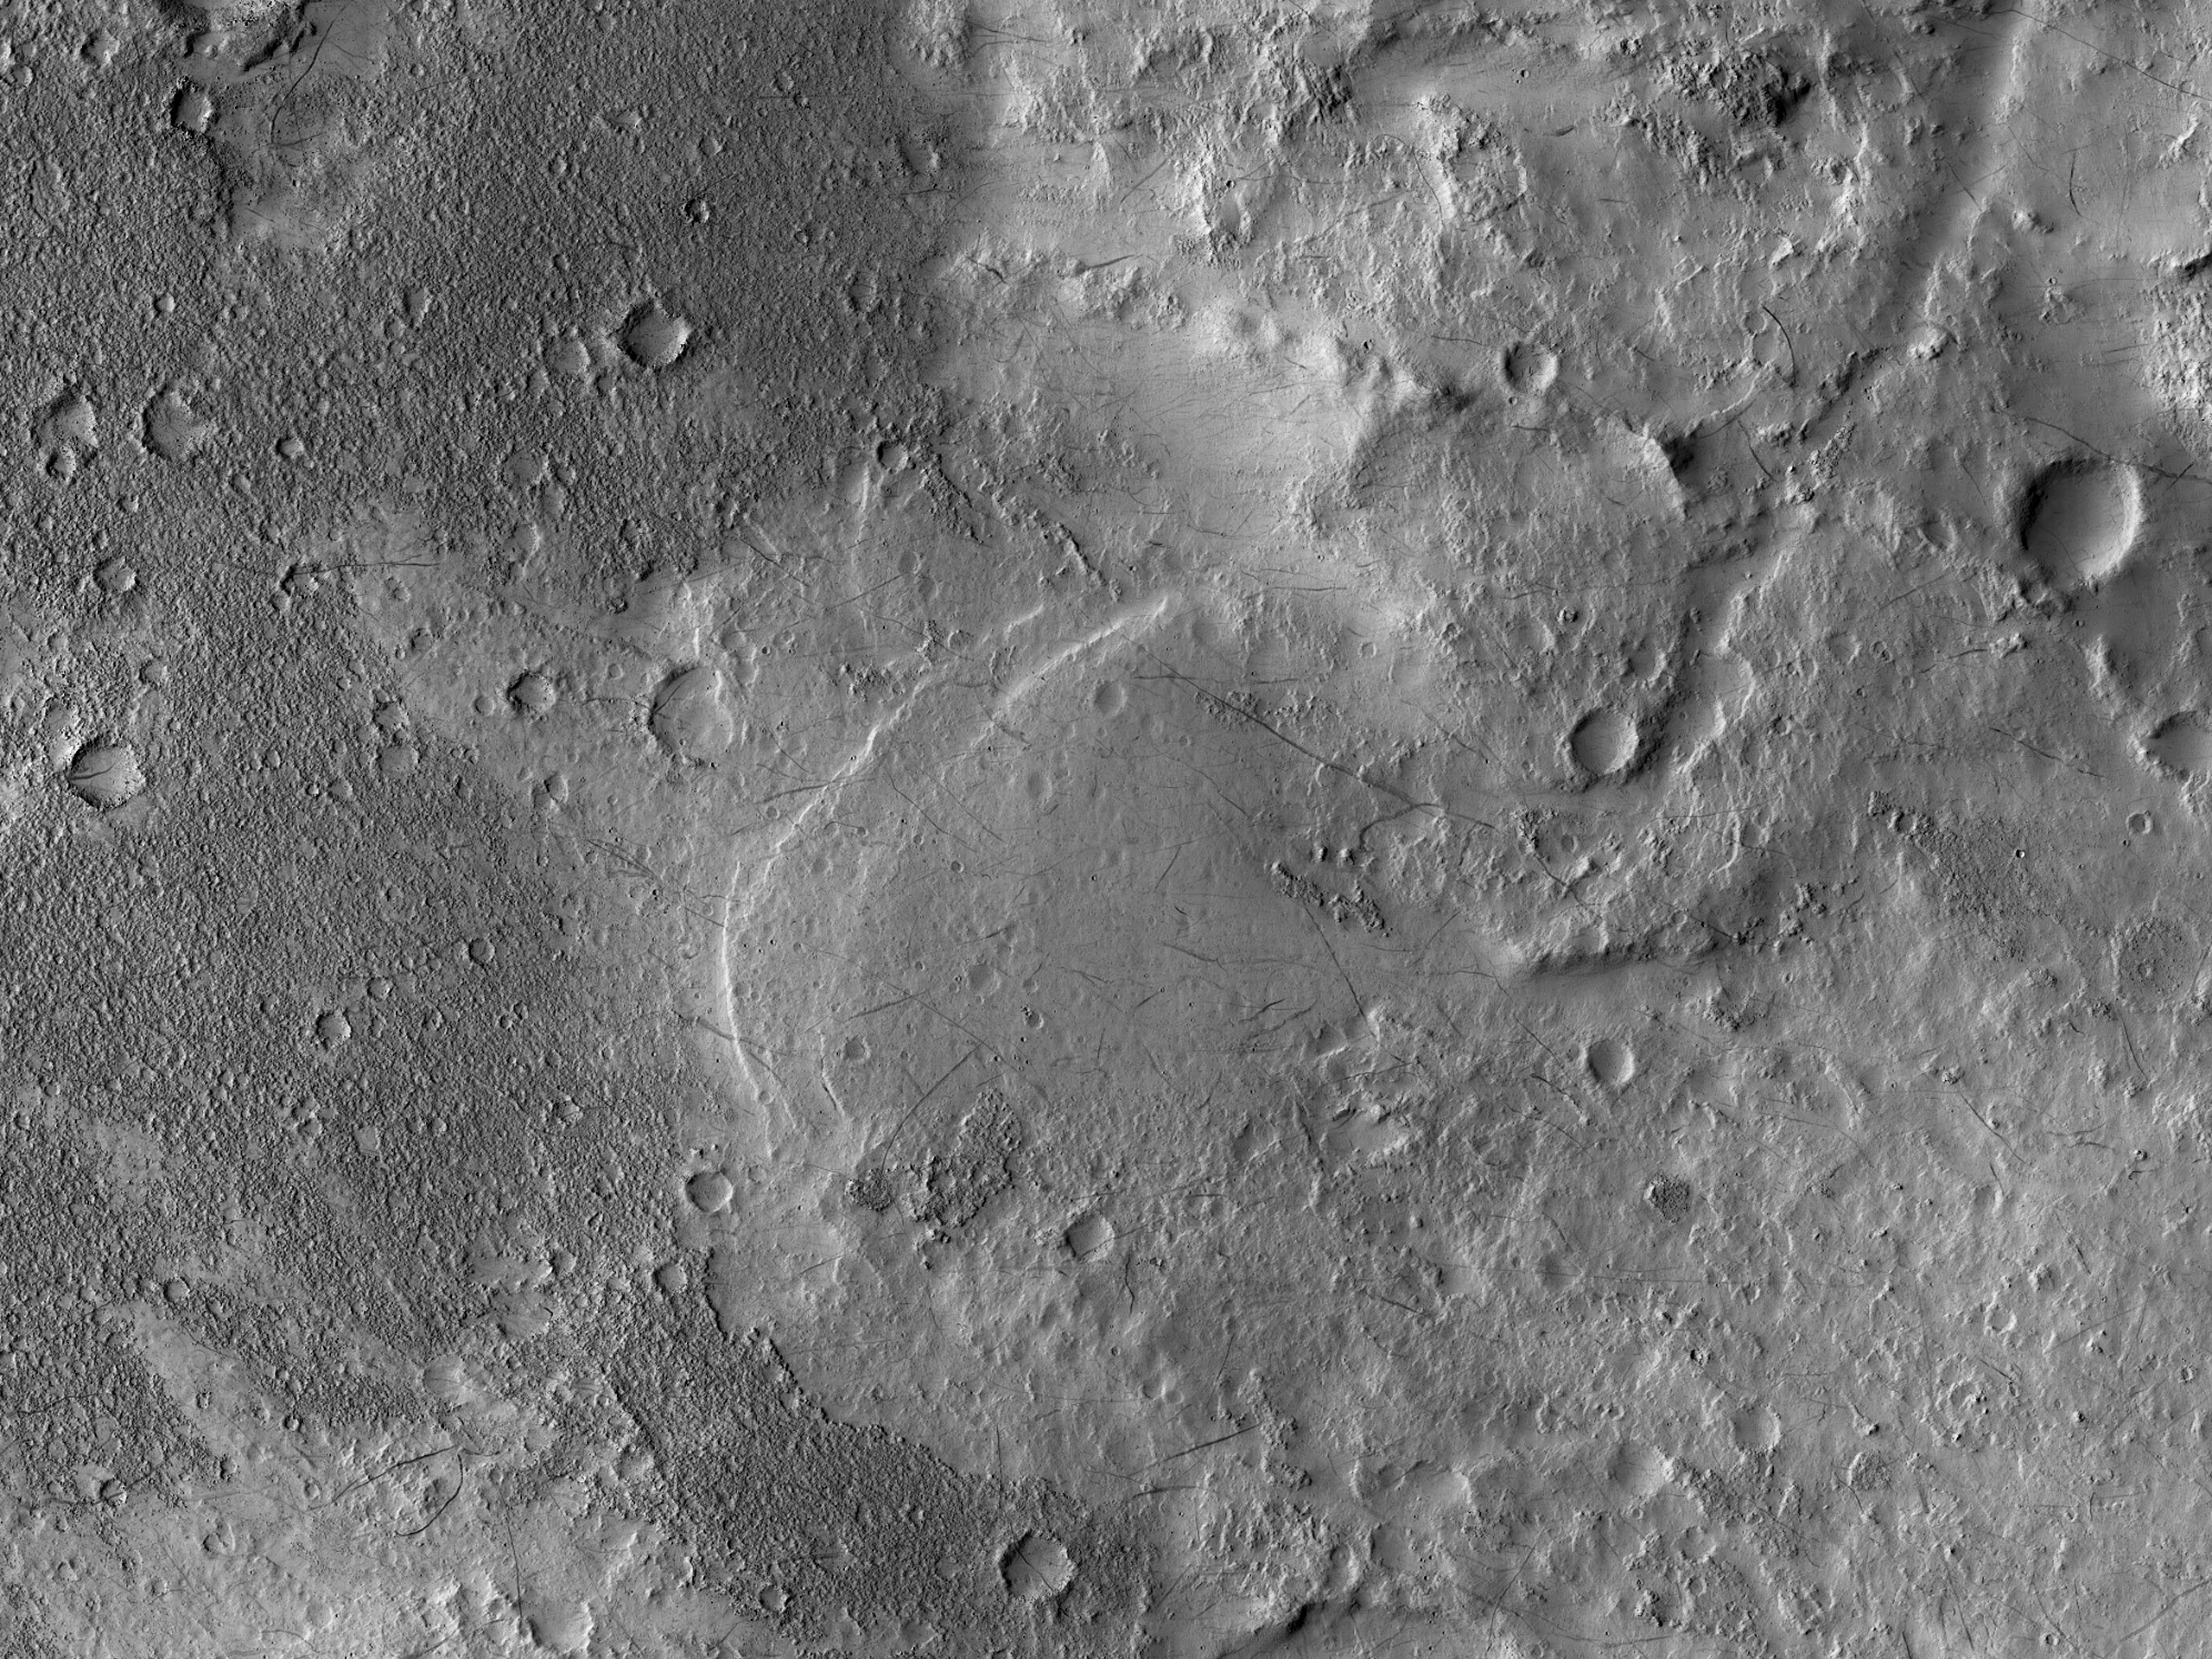 Transitions on a Crater Floor